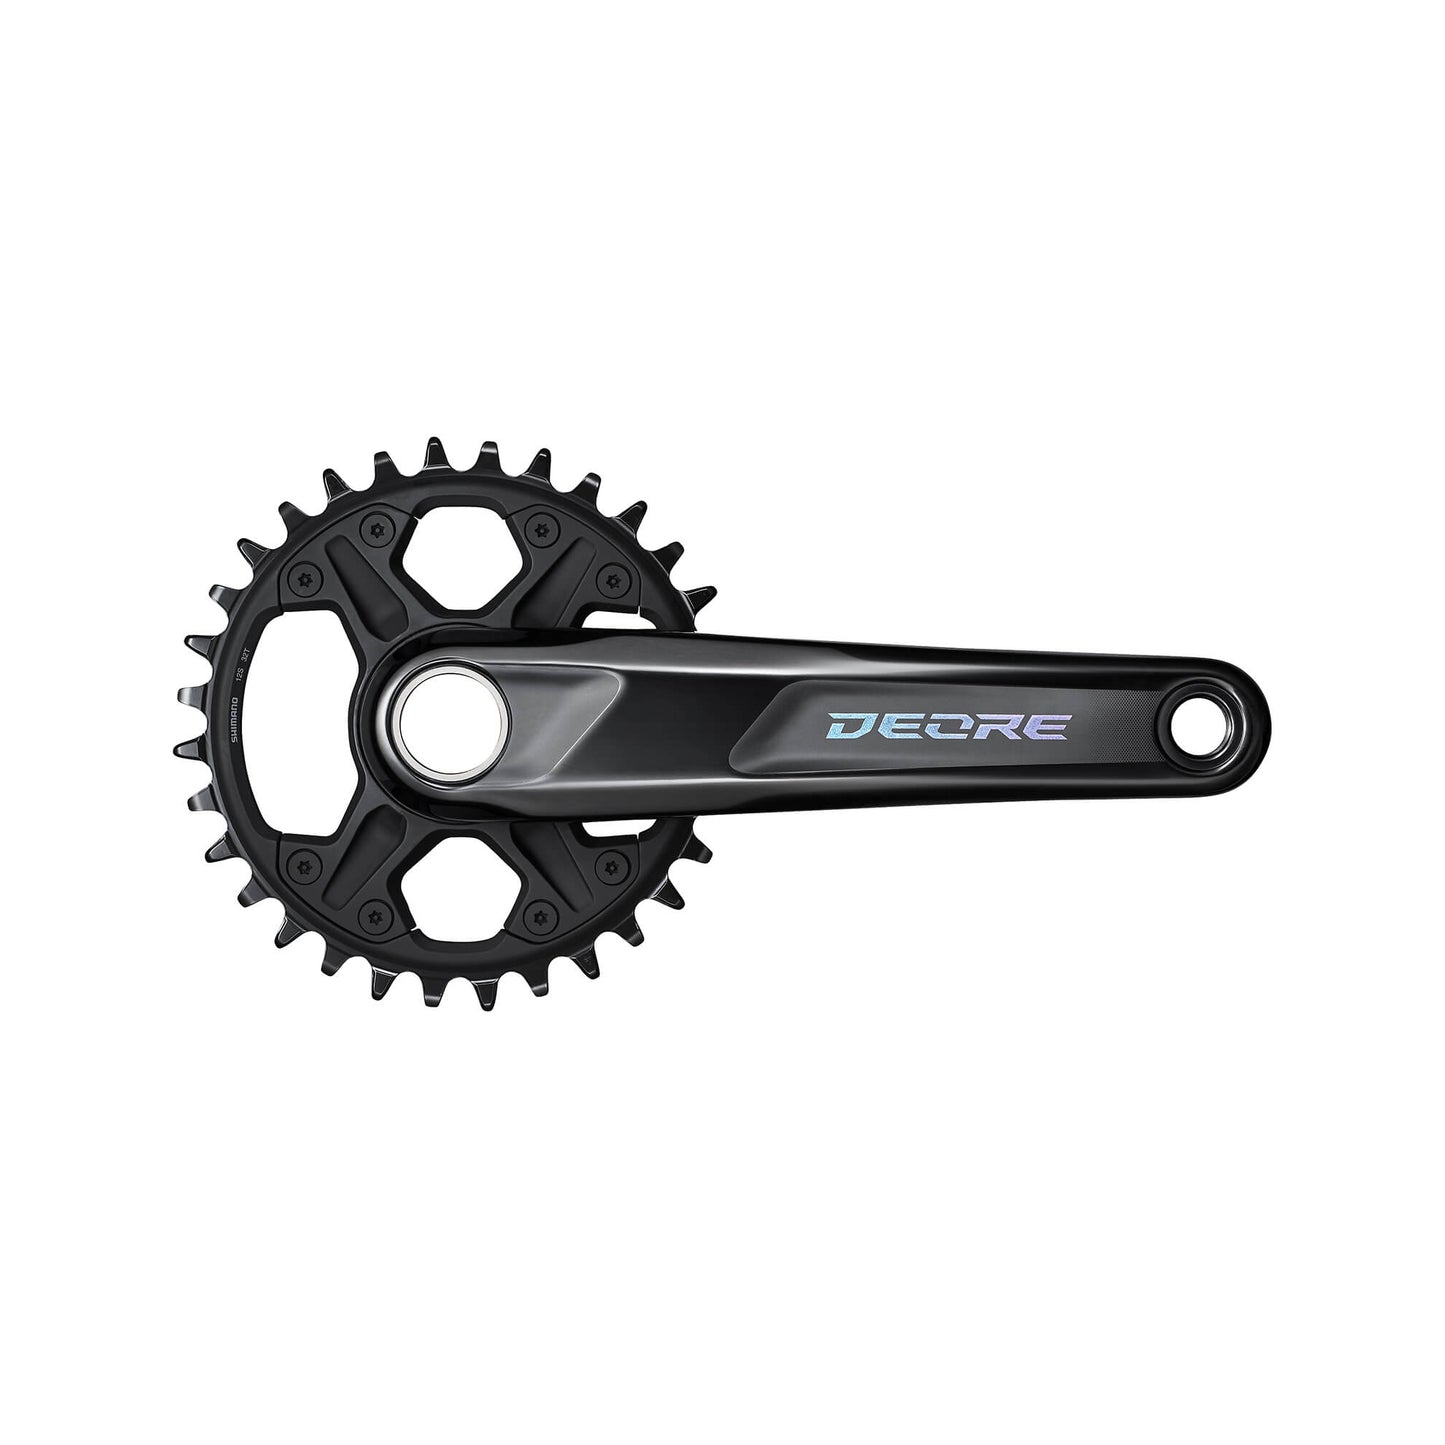 Shimano Deore FC-M6100 1x12 Speed Crank Arms - 24mm - Shimano Direct Mount - 52mm Chainline - Black - 170mm - 68-73mm - 30T